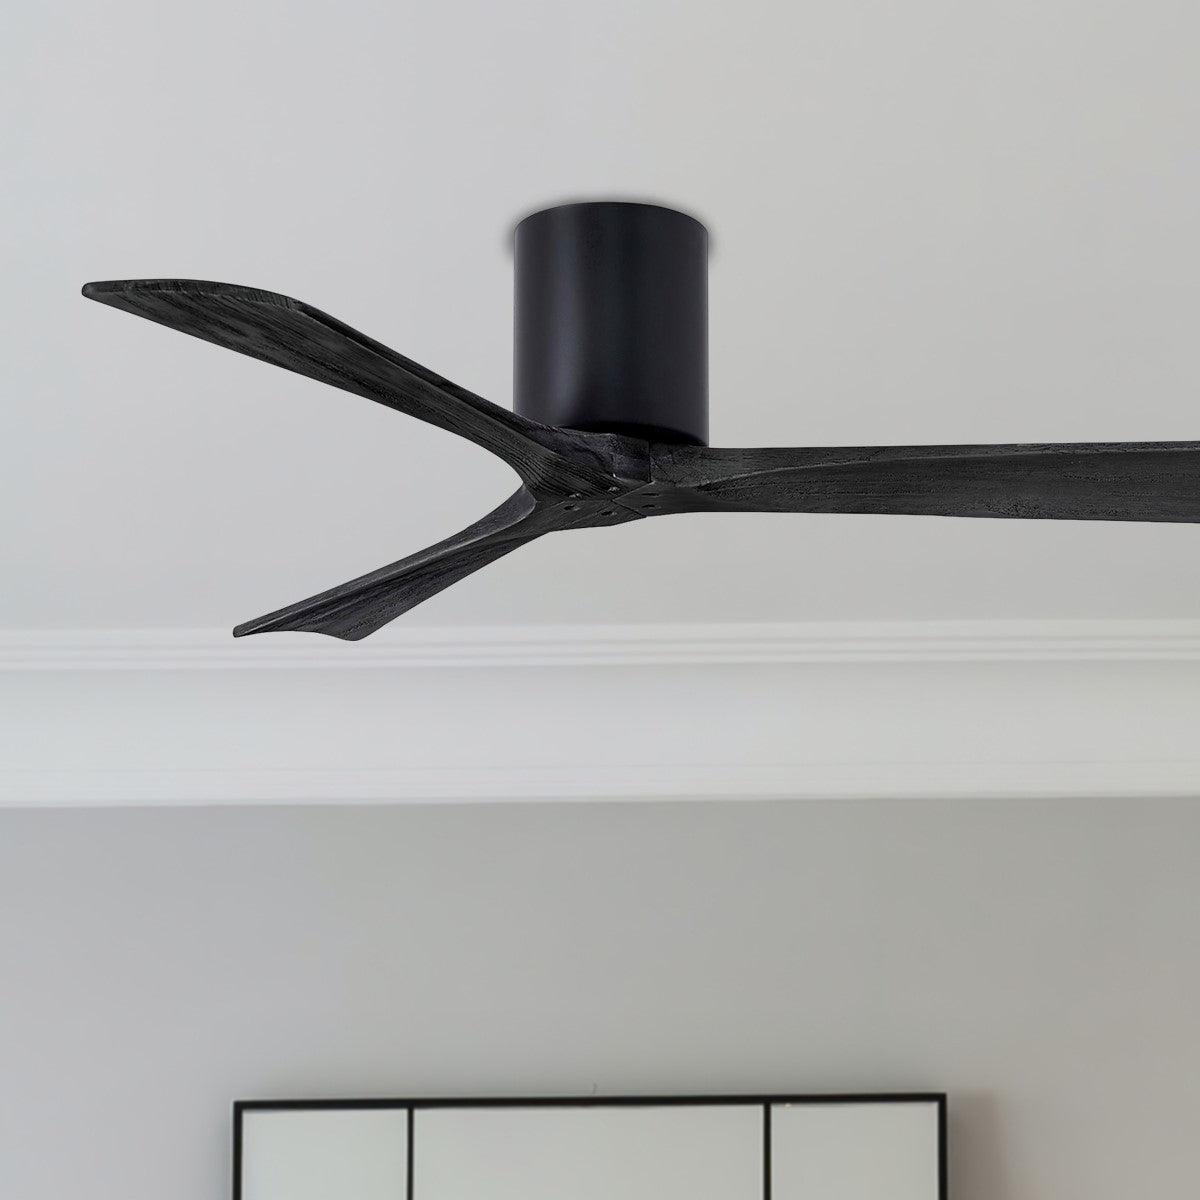 Irene 52 Inch Low Profile Outdoor Ceiling Fan With Remote And Wall Control